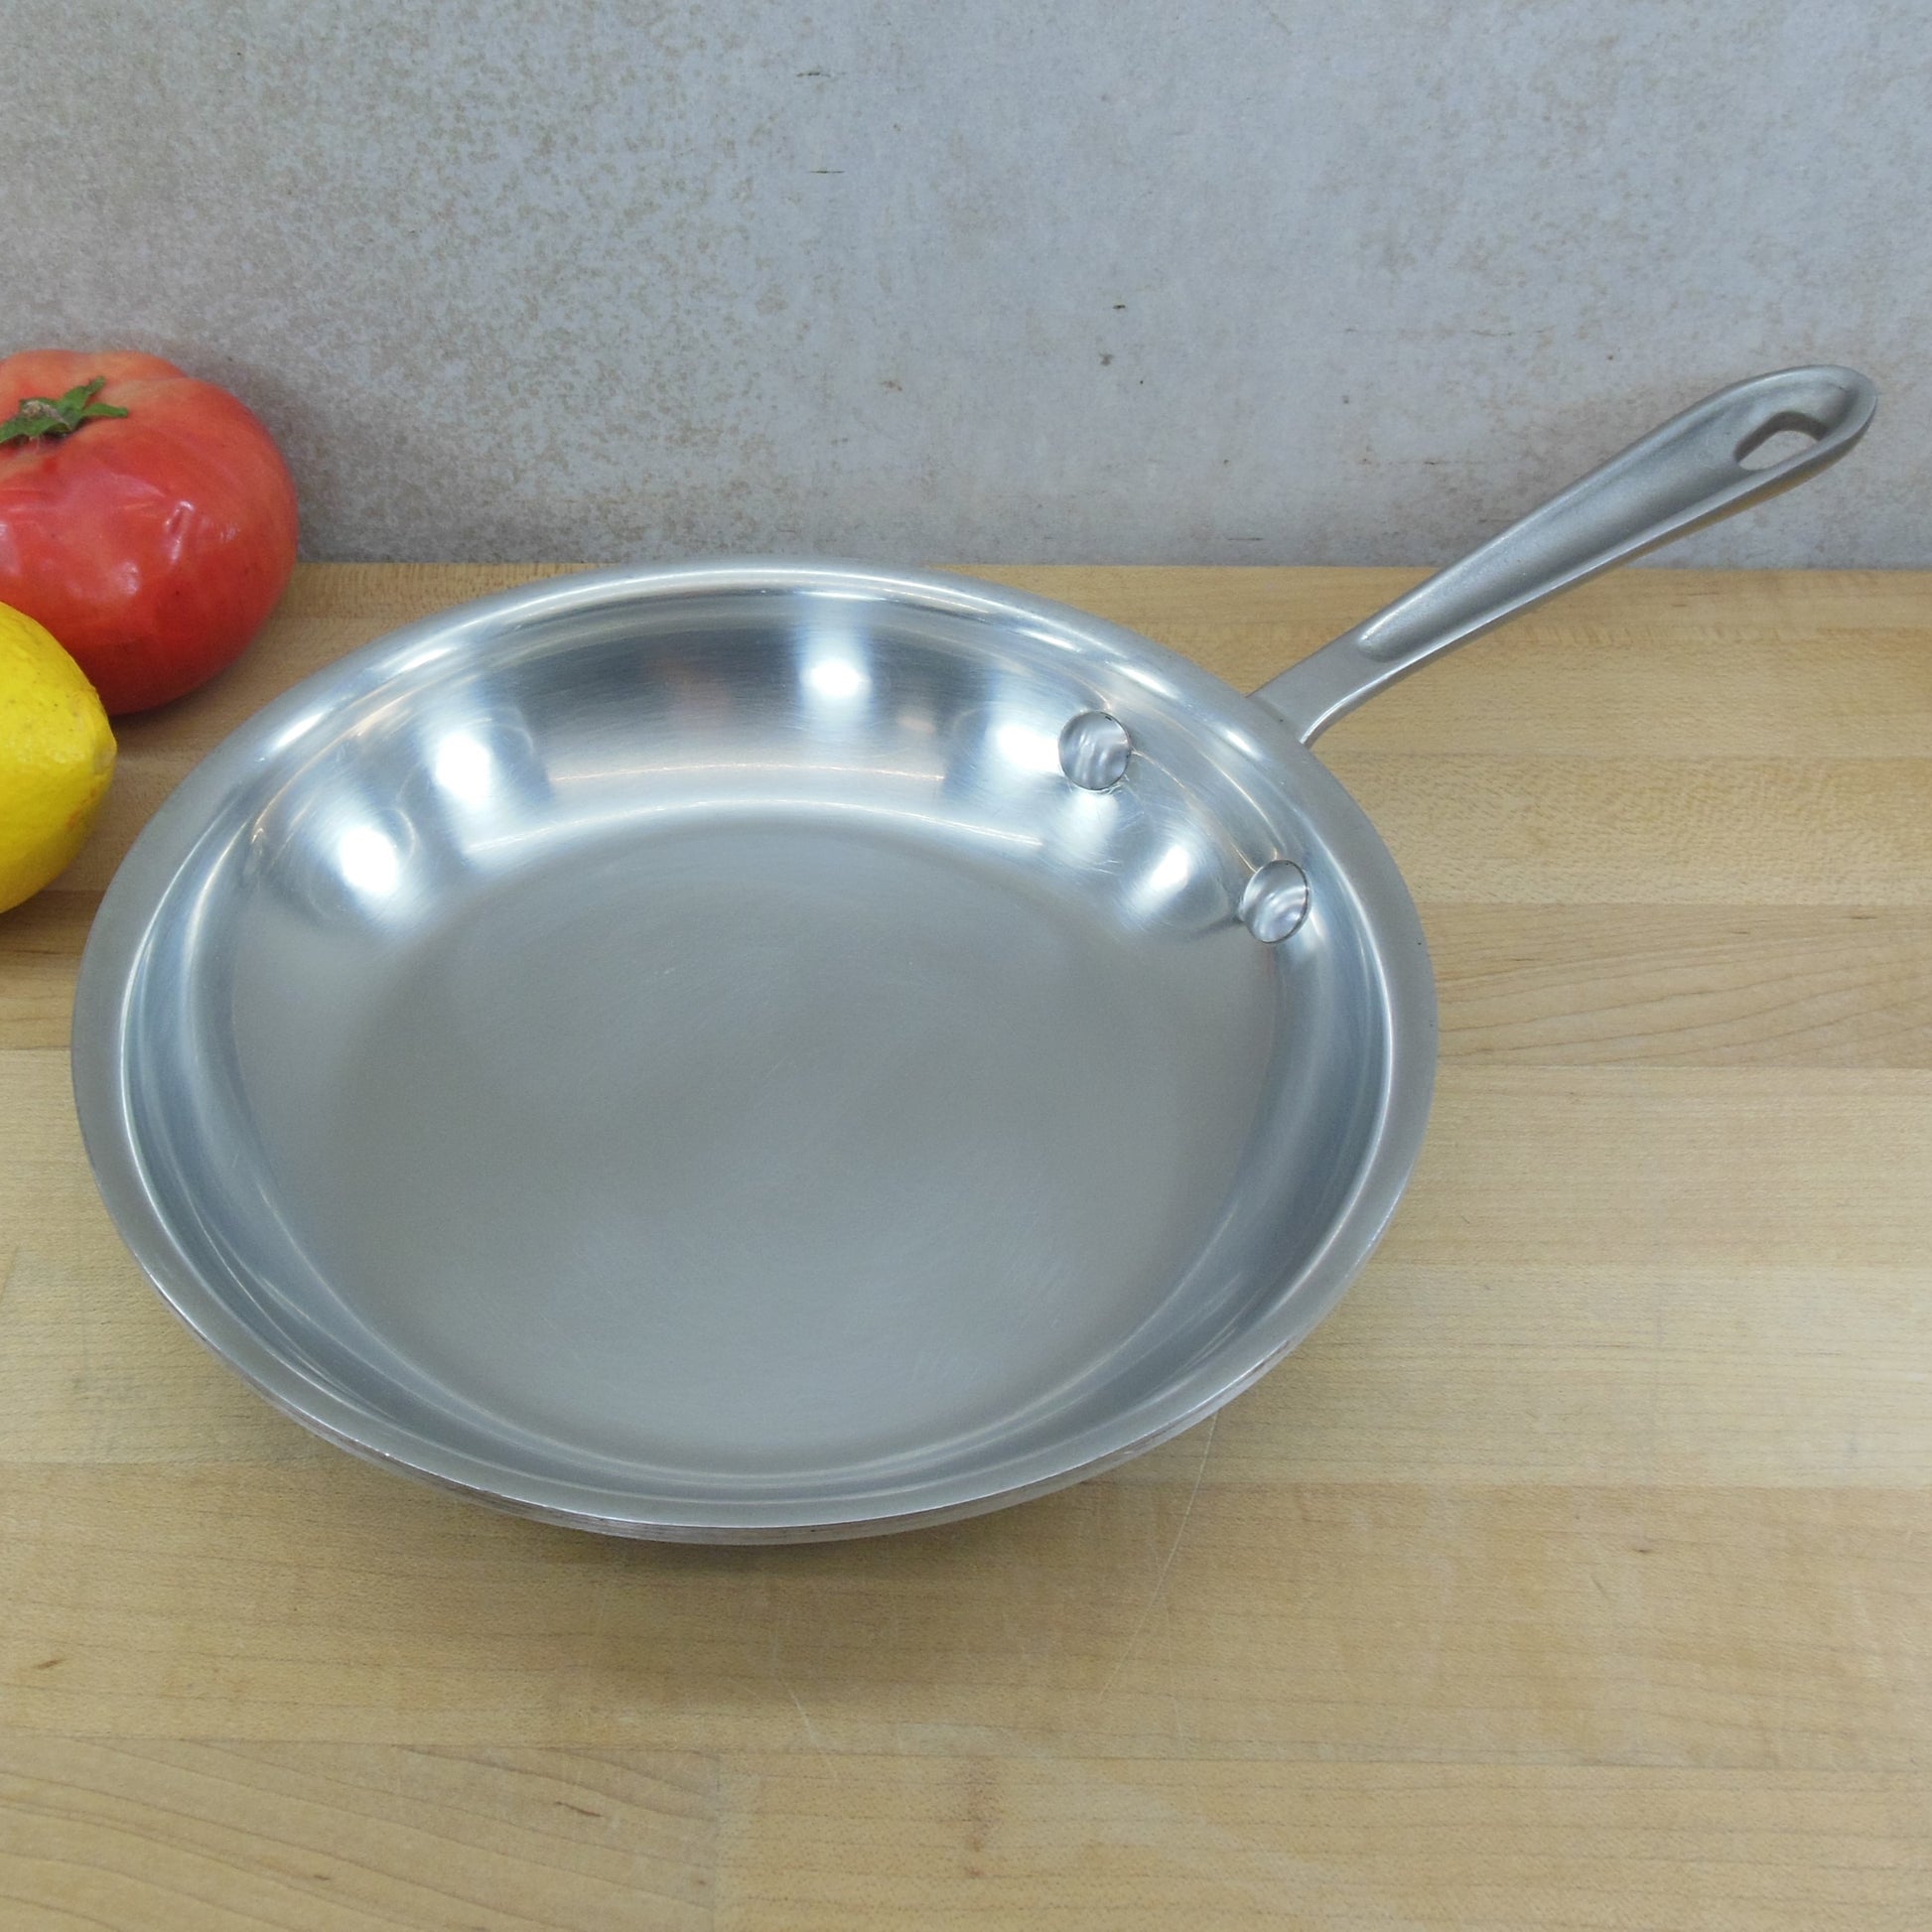 All-Clad Ltd Stainless Anodized 8.5" Fry Pan Skillet